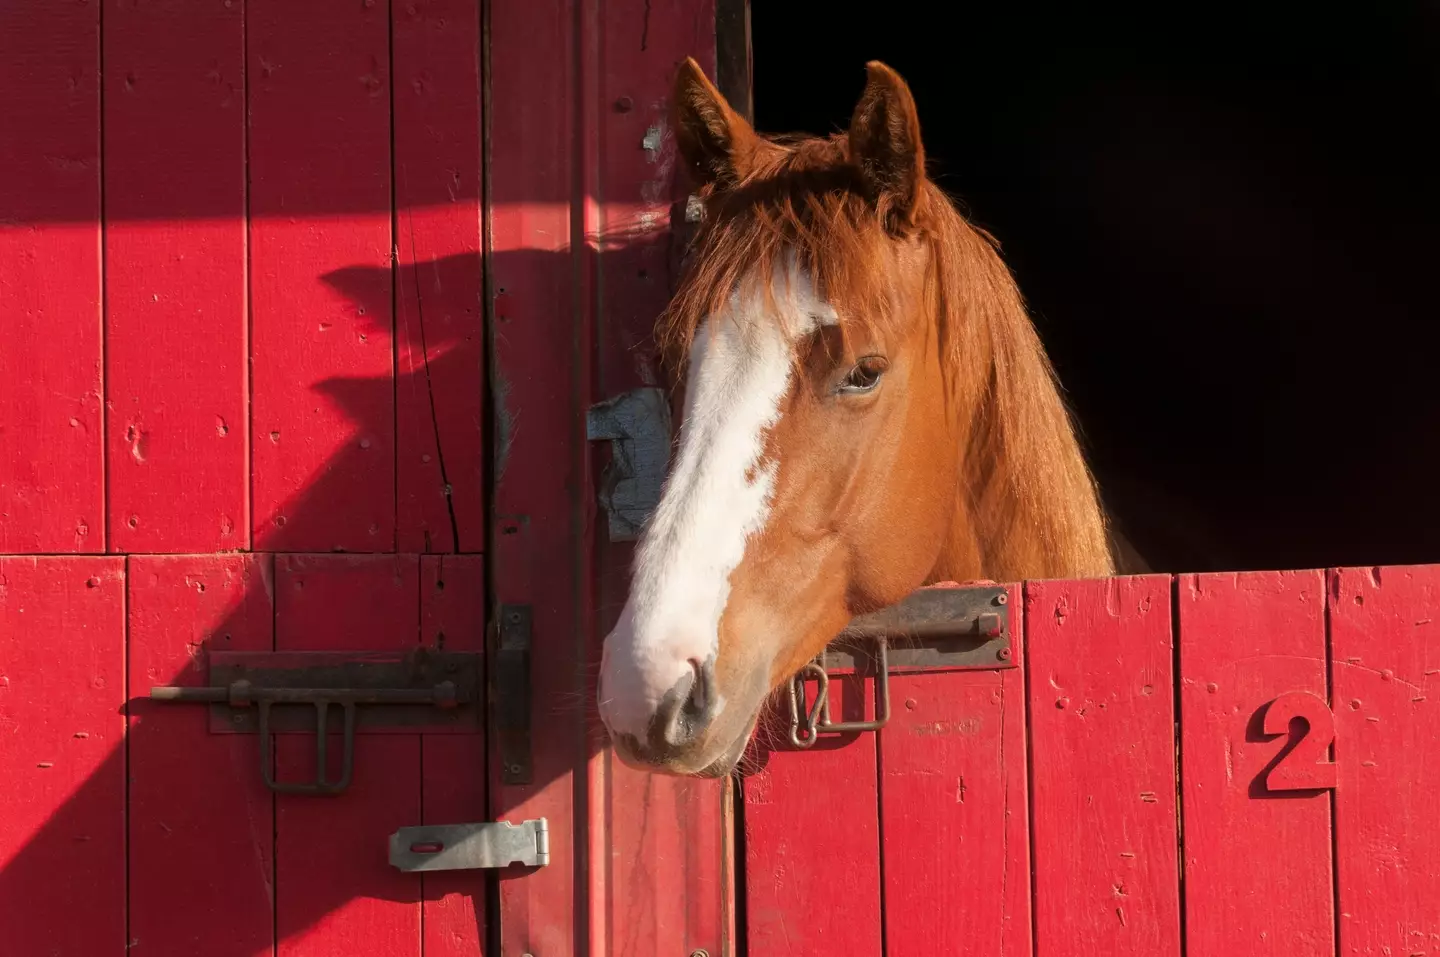 Horses can be panicked by fireworks and one recently died after some were set off near its field.